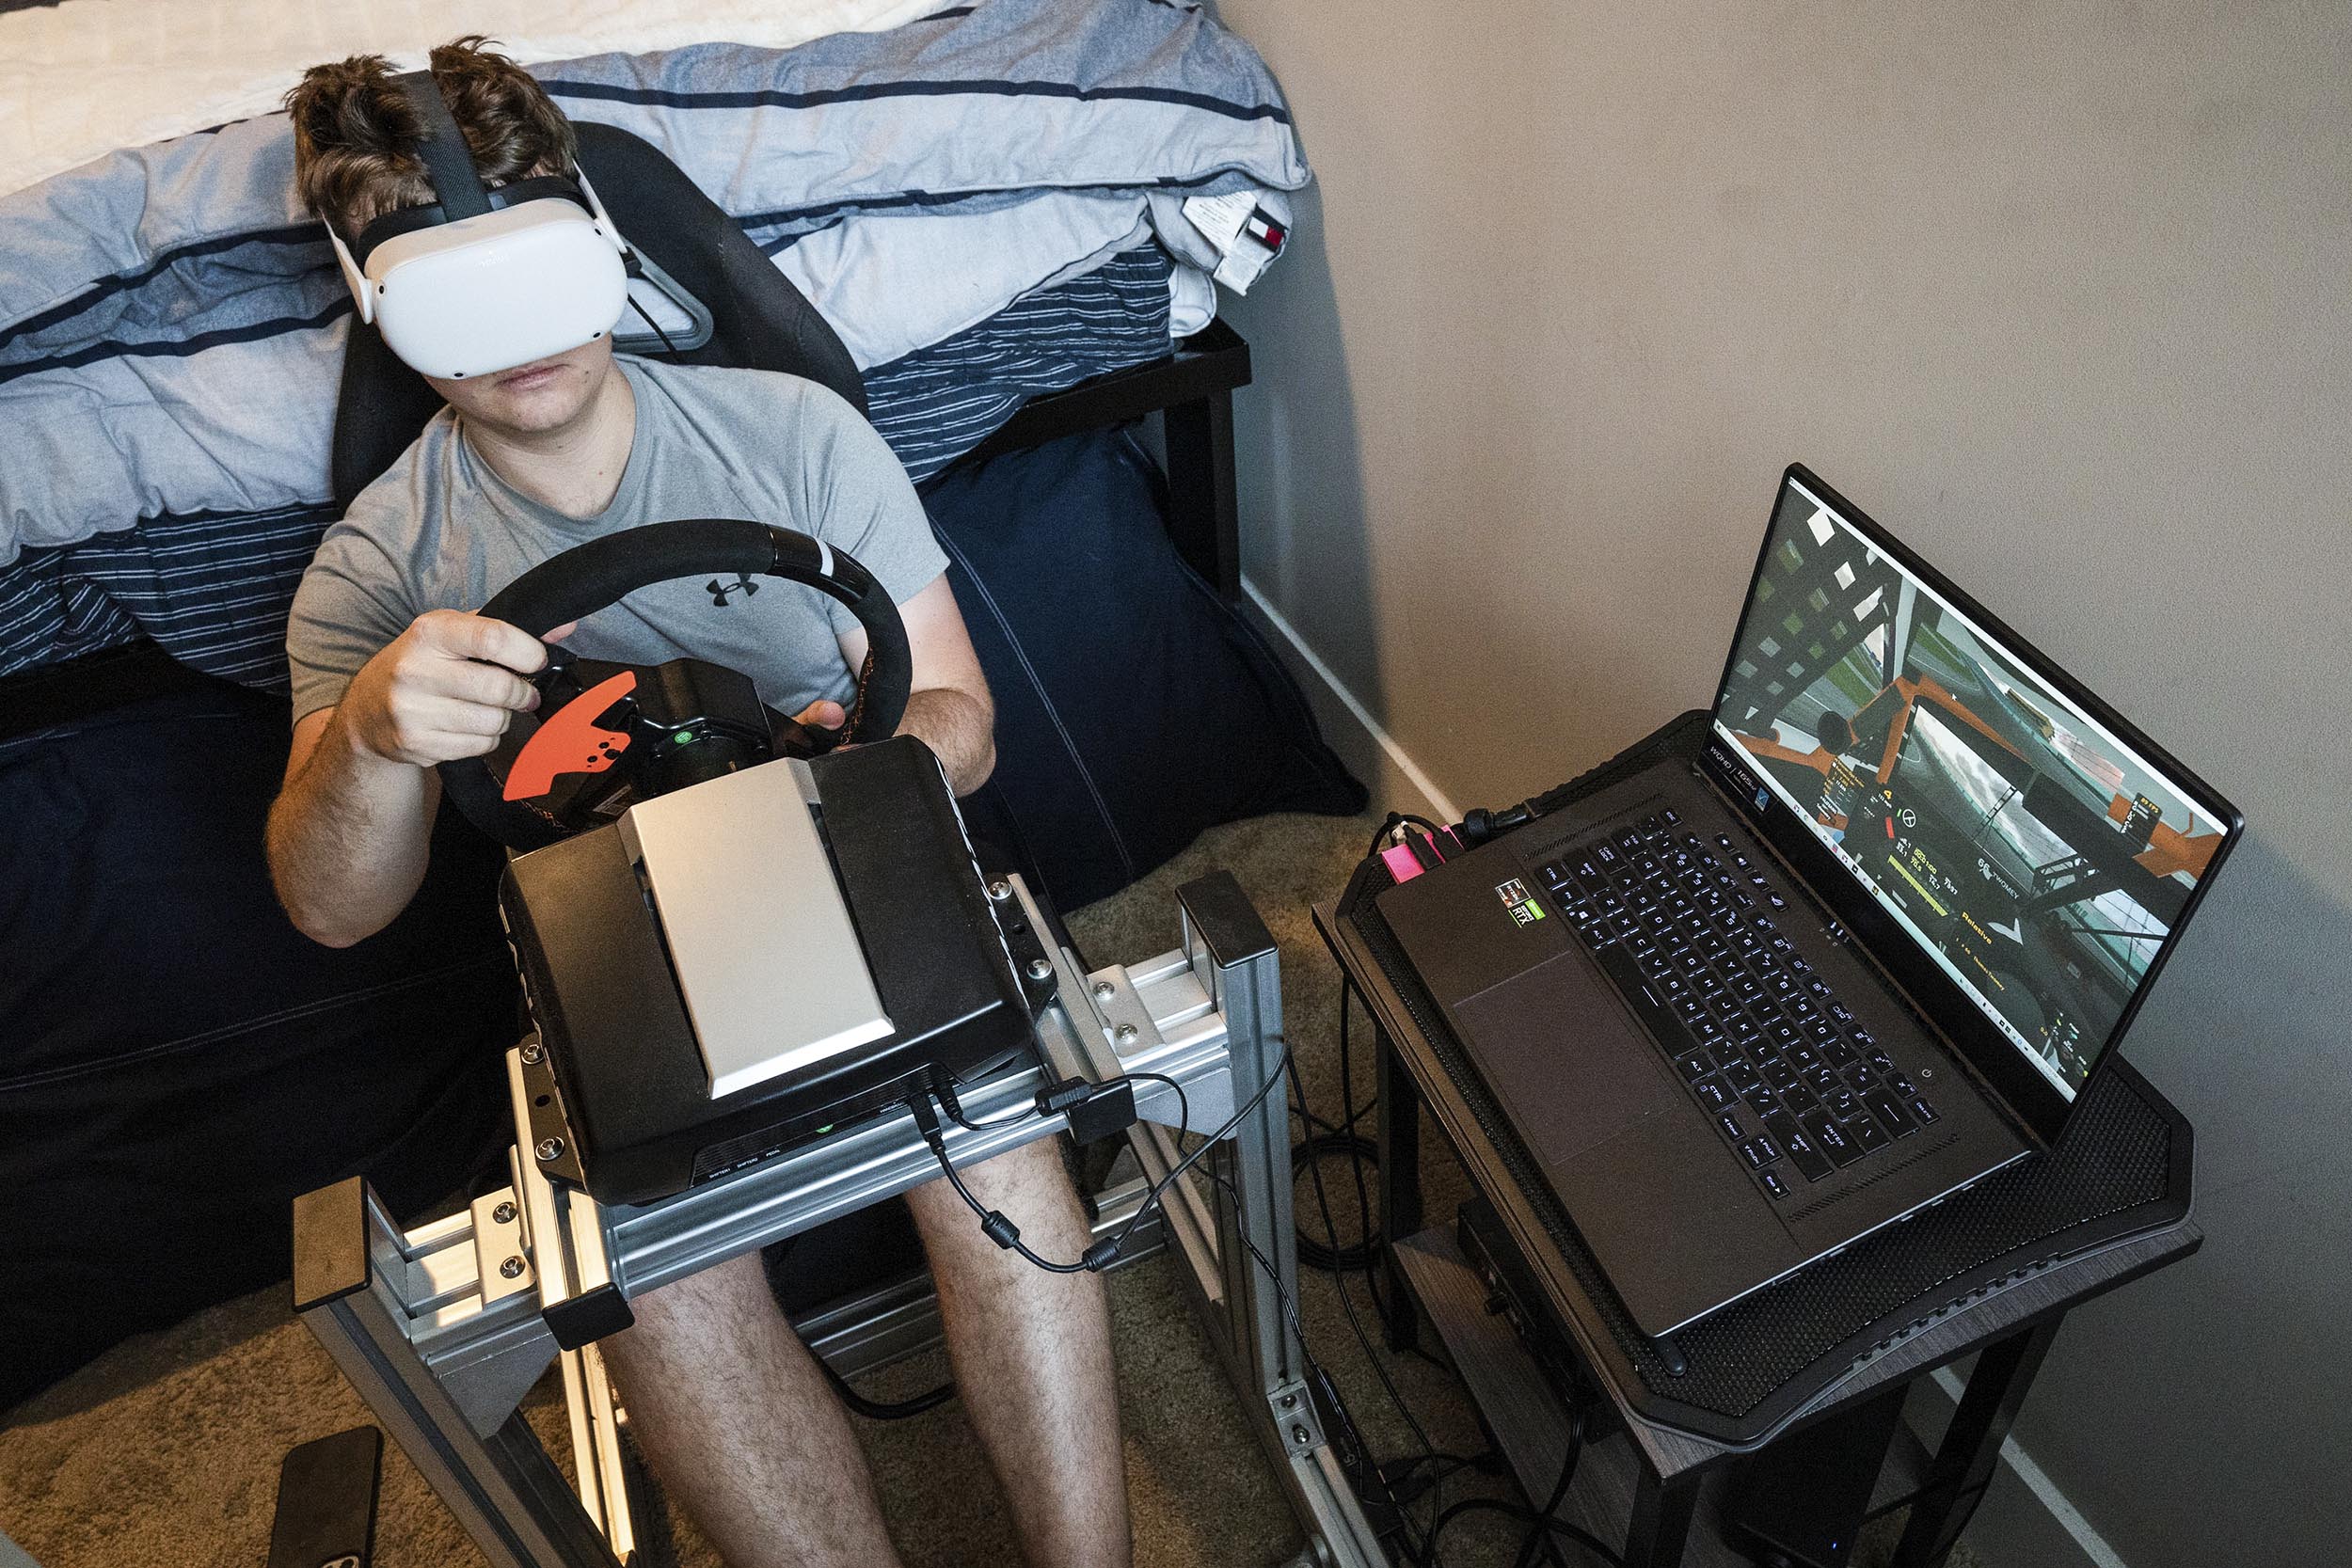 Engineering Student Builds Auto Racing Simulator During Pandemic